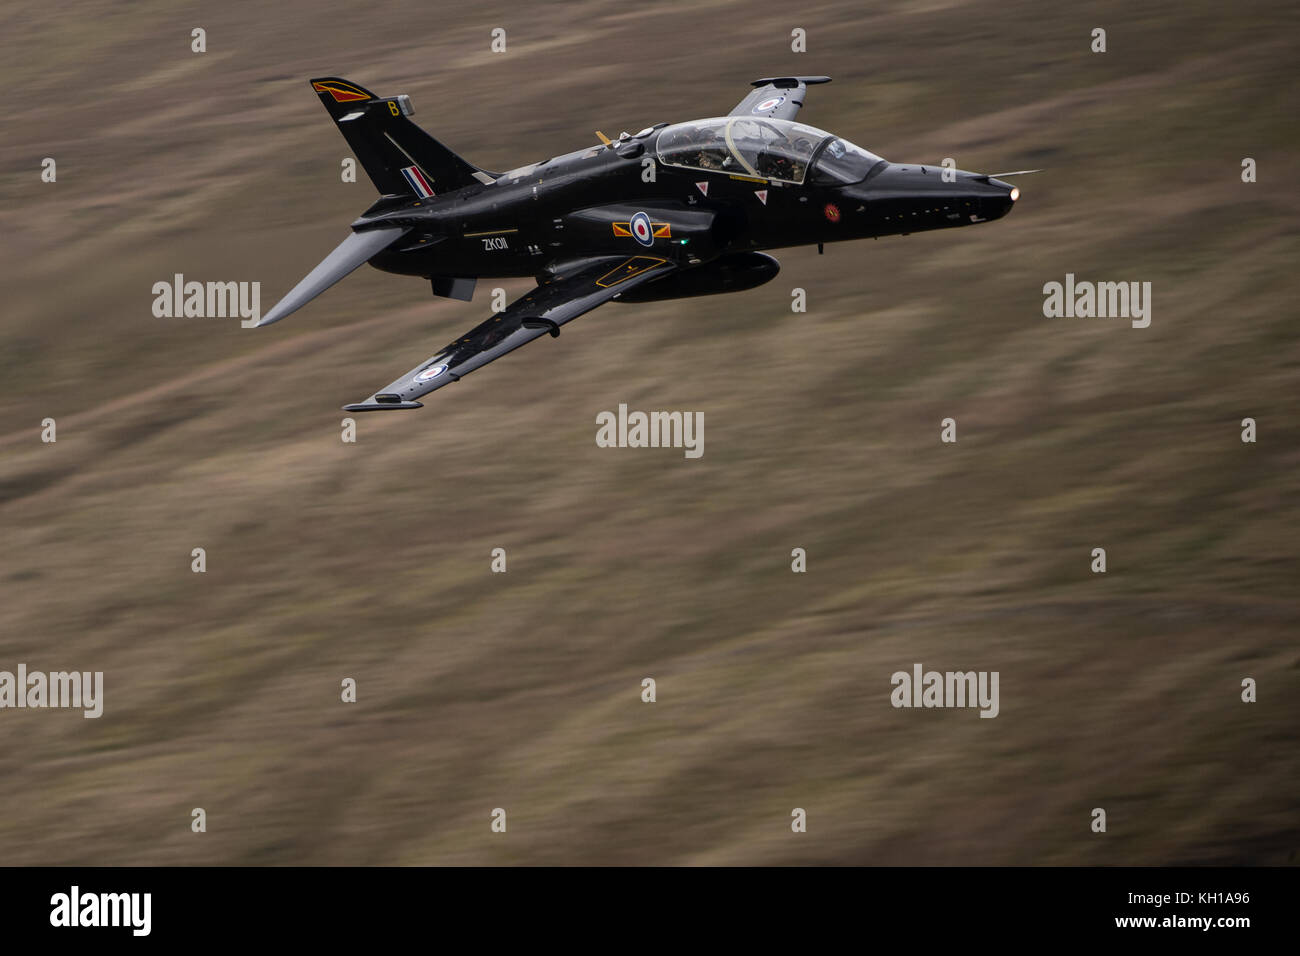 Royal Air Force Hawk T2 aircraft conducting low flying training through Snowdonia National Park in Wales. Stock Photo